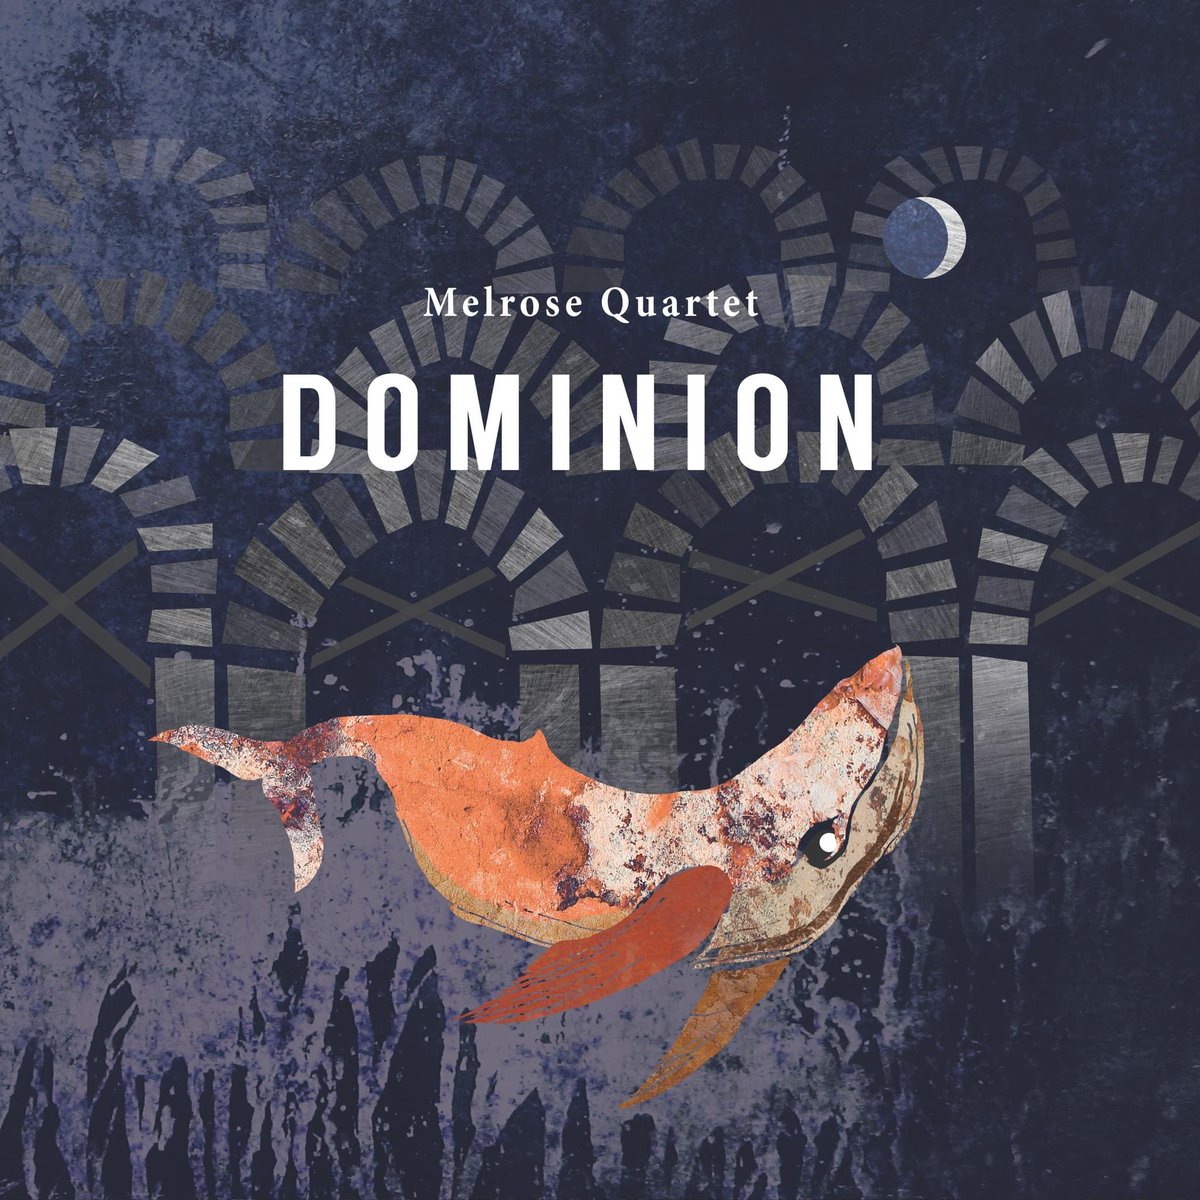 If you missed a physical copy of our 2017 “Dominion”, we’re releasing it digitally at 9am tomorrow Dec 1st here: melrosequartet.bandcamp.com and it’s Bandcamp Friday so they’ll waive their cut. “Sublime. Brimming with warmth and energy that make it irresistible.” R2R